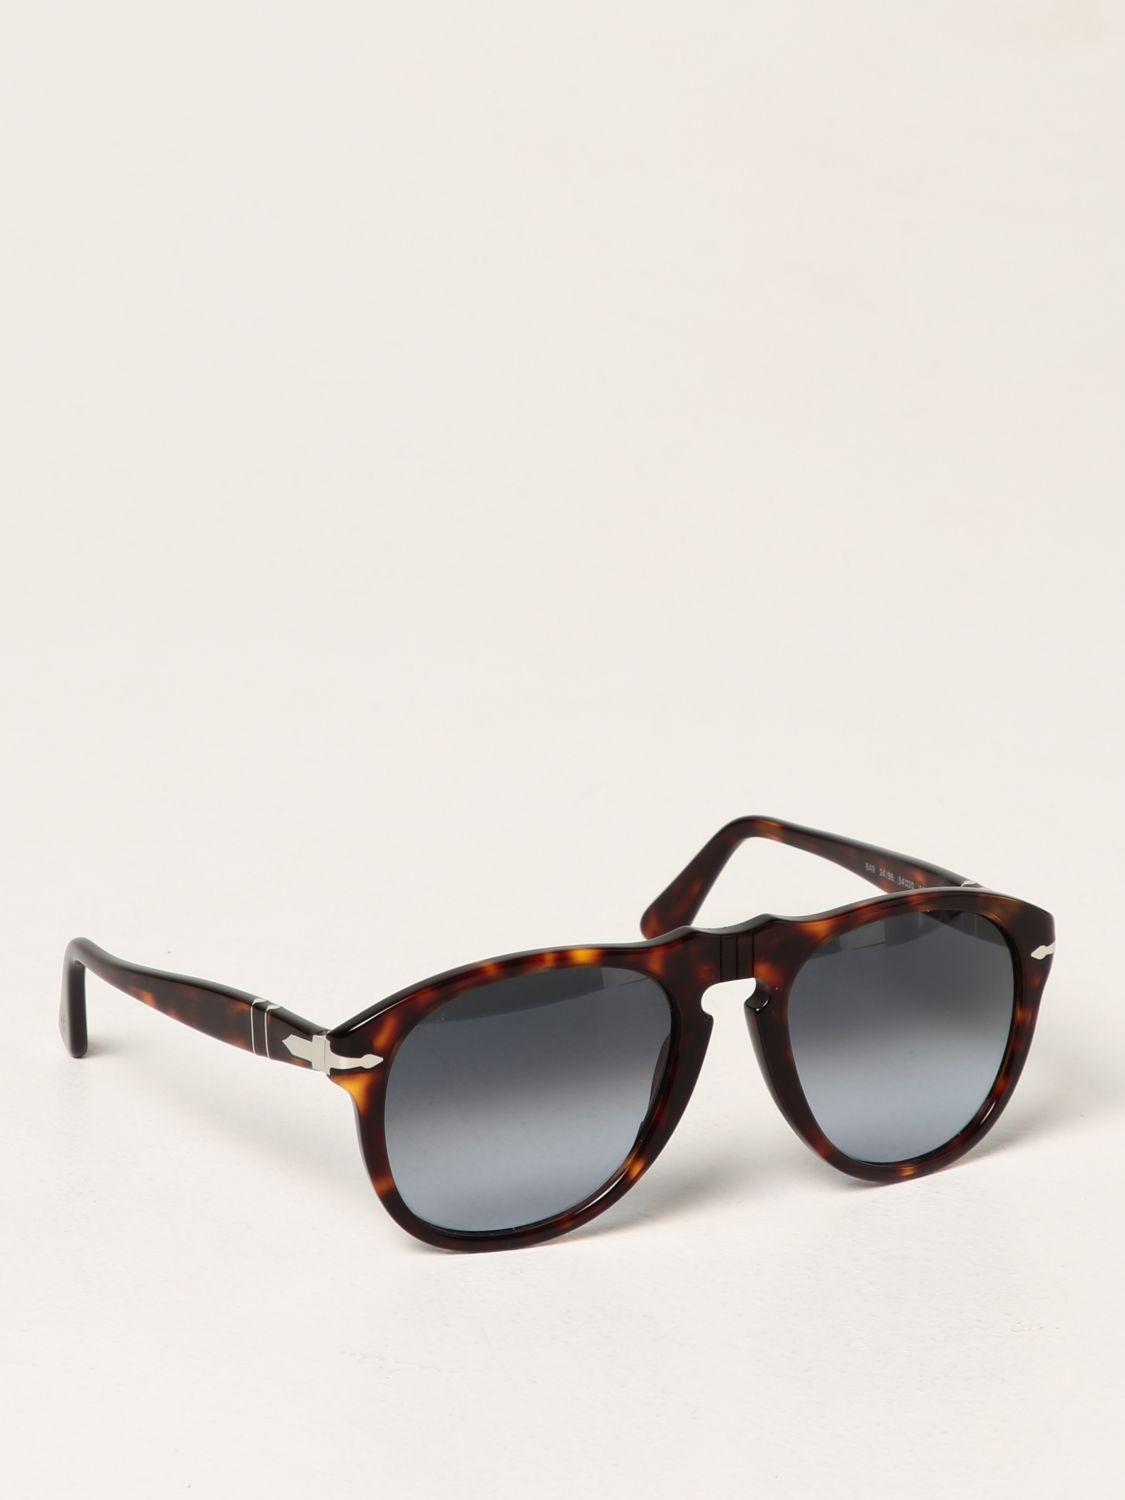 Persol Discounts and Cash Back for Military, Nurses, & More | ID.me Shop